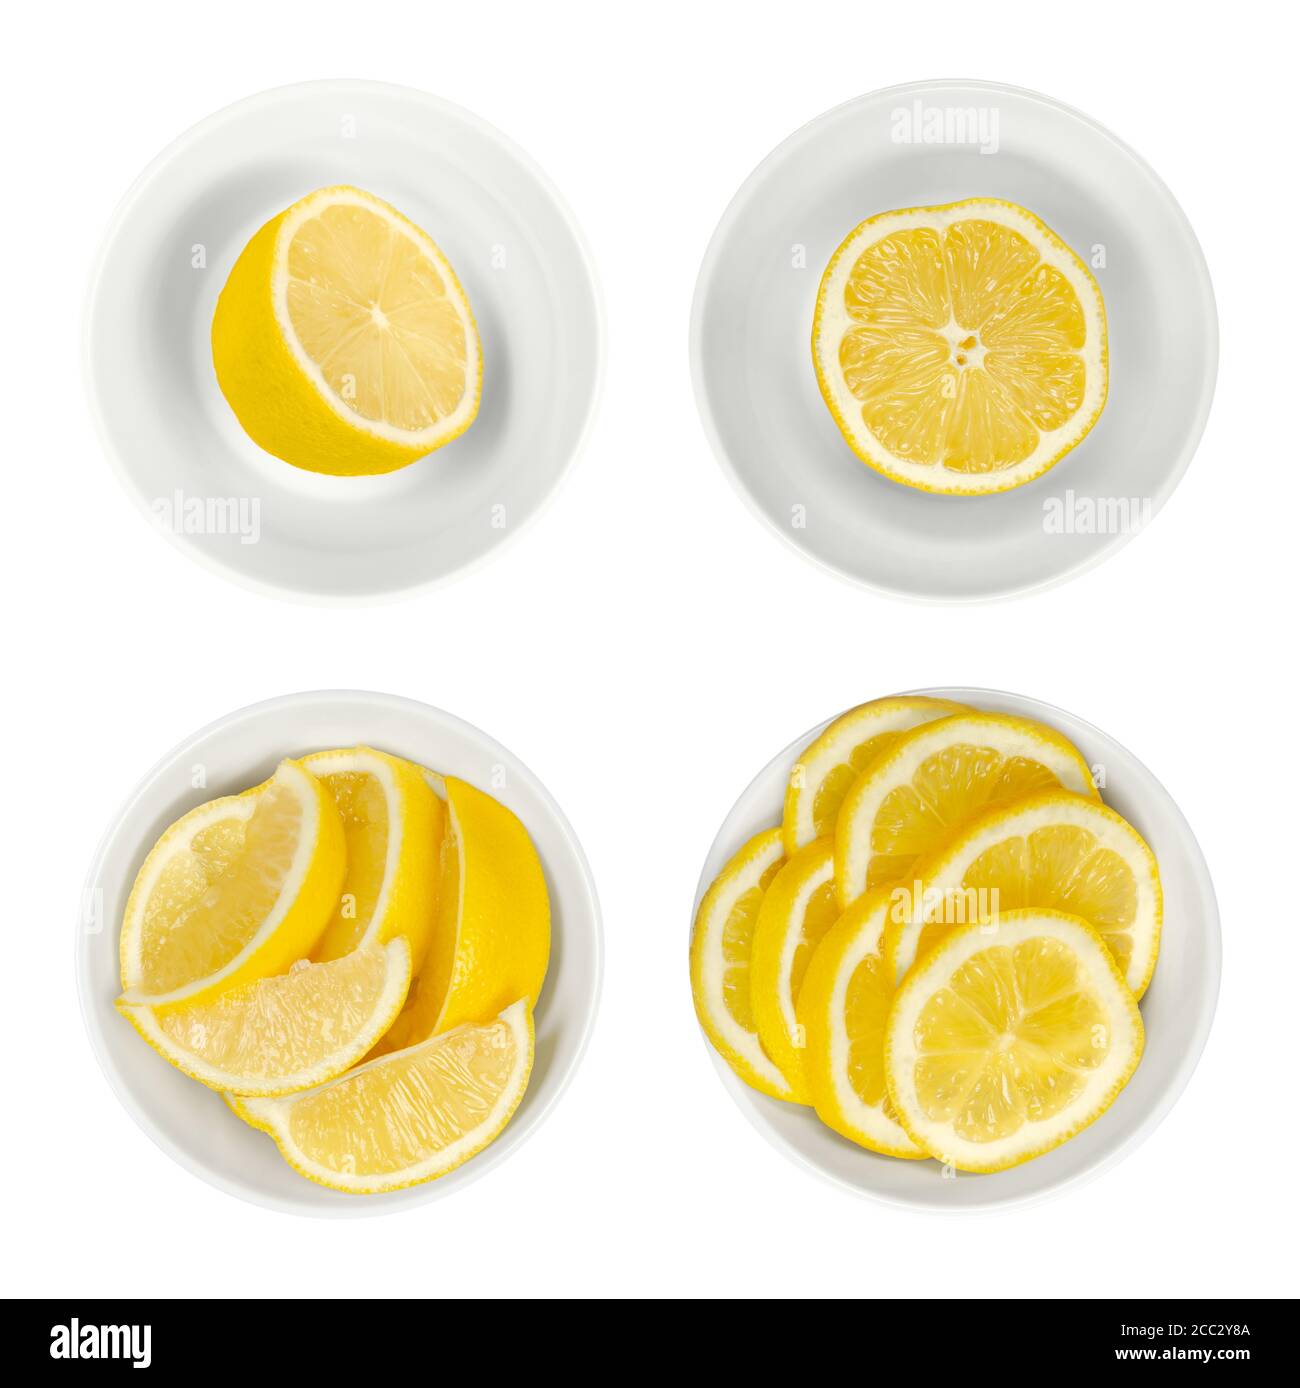 Lemons in white glass bowls. Freshly cut lemon halves, wedges and slices. Ripe and yellow citrus fruits, used for culinary purposes. Citrus limon. Stock Photo